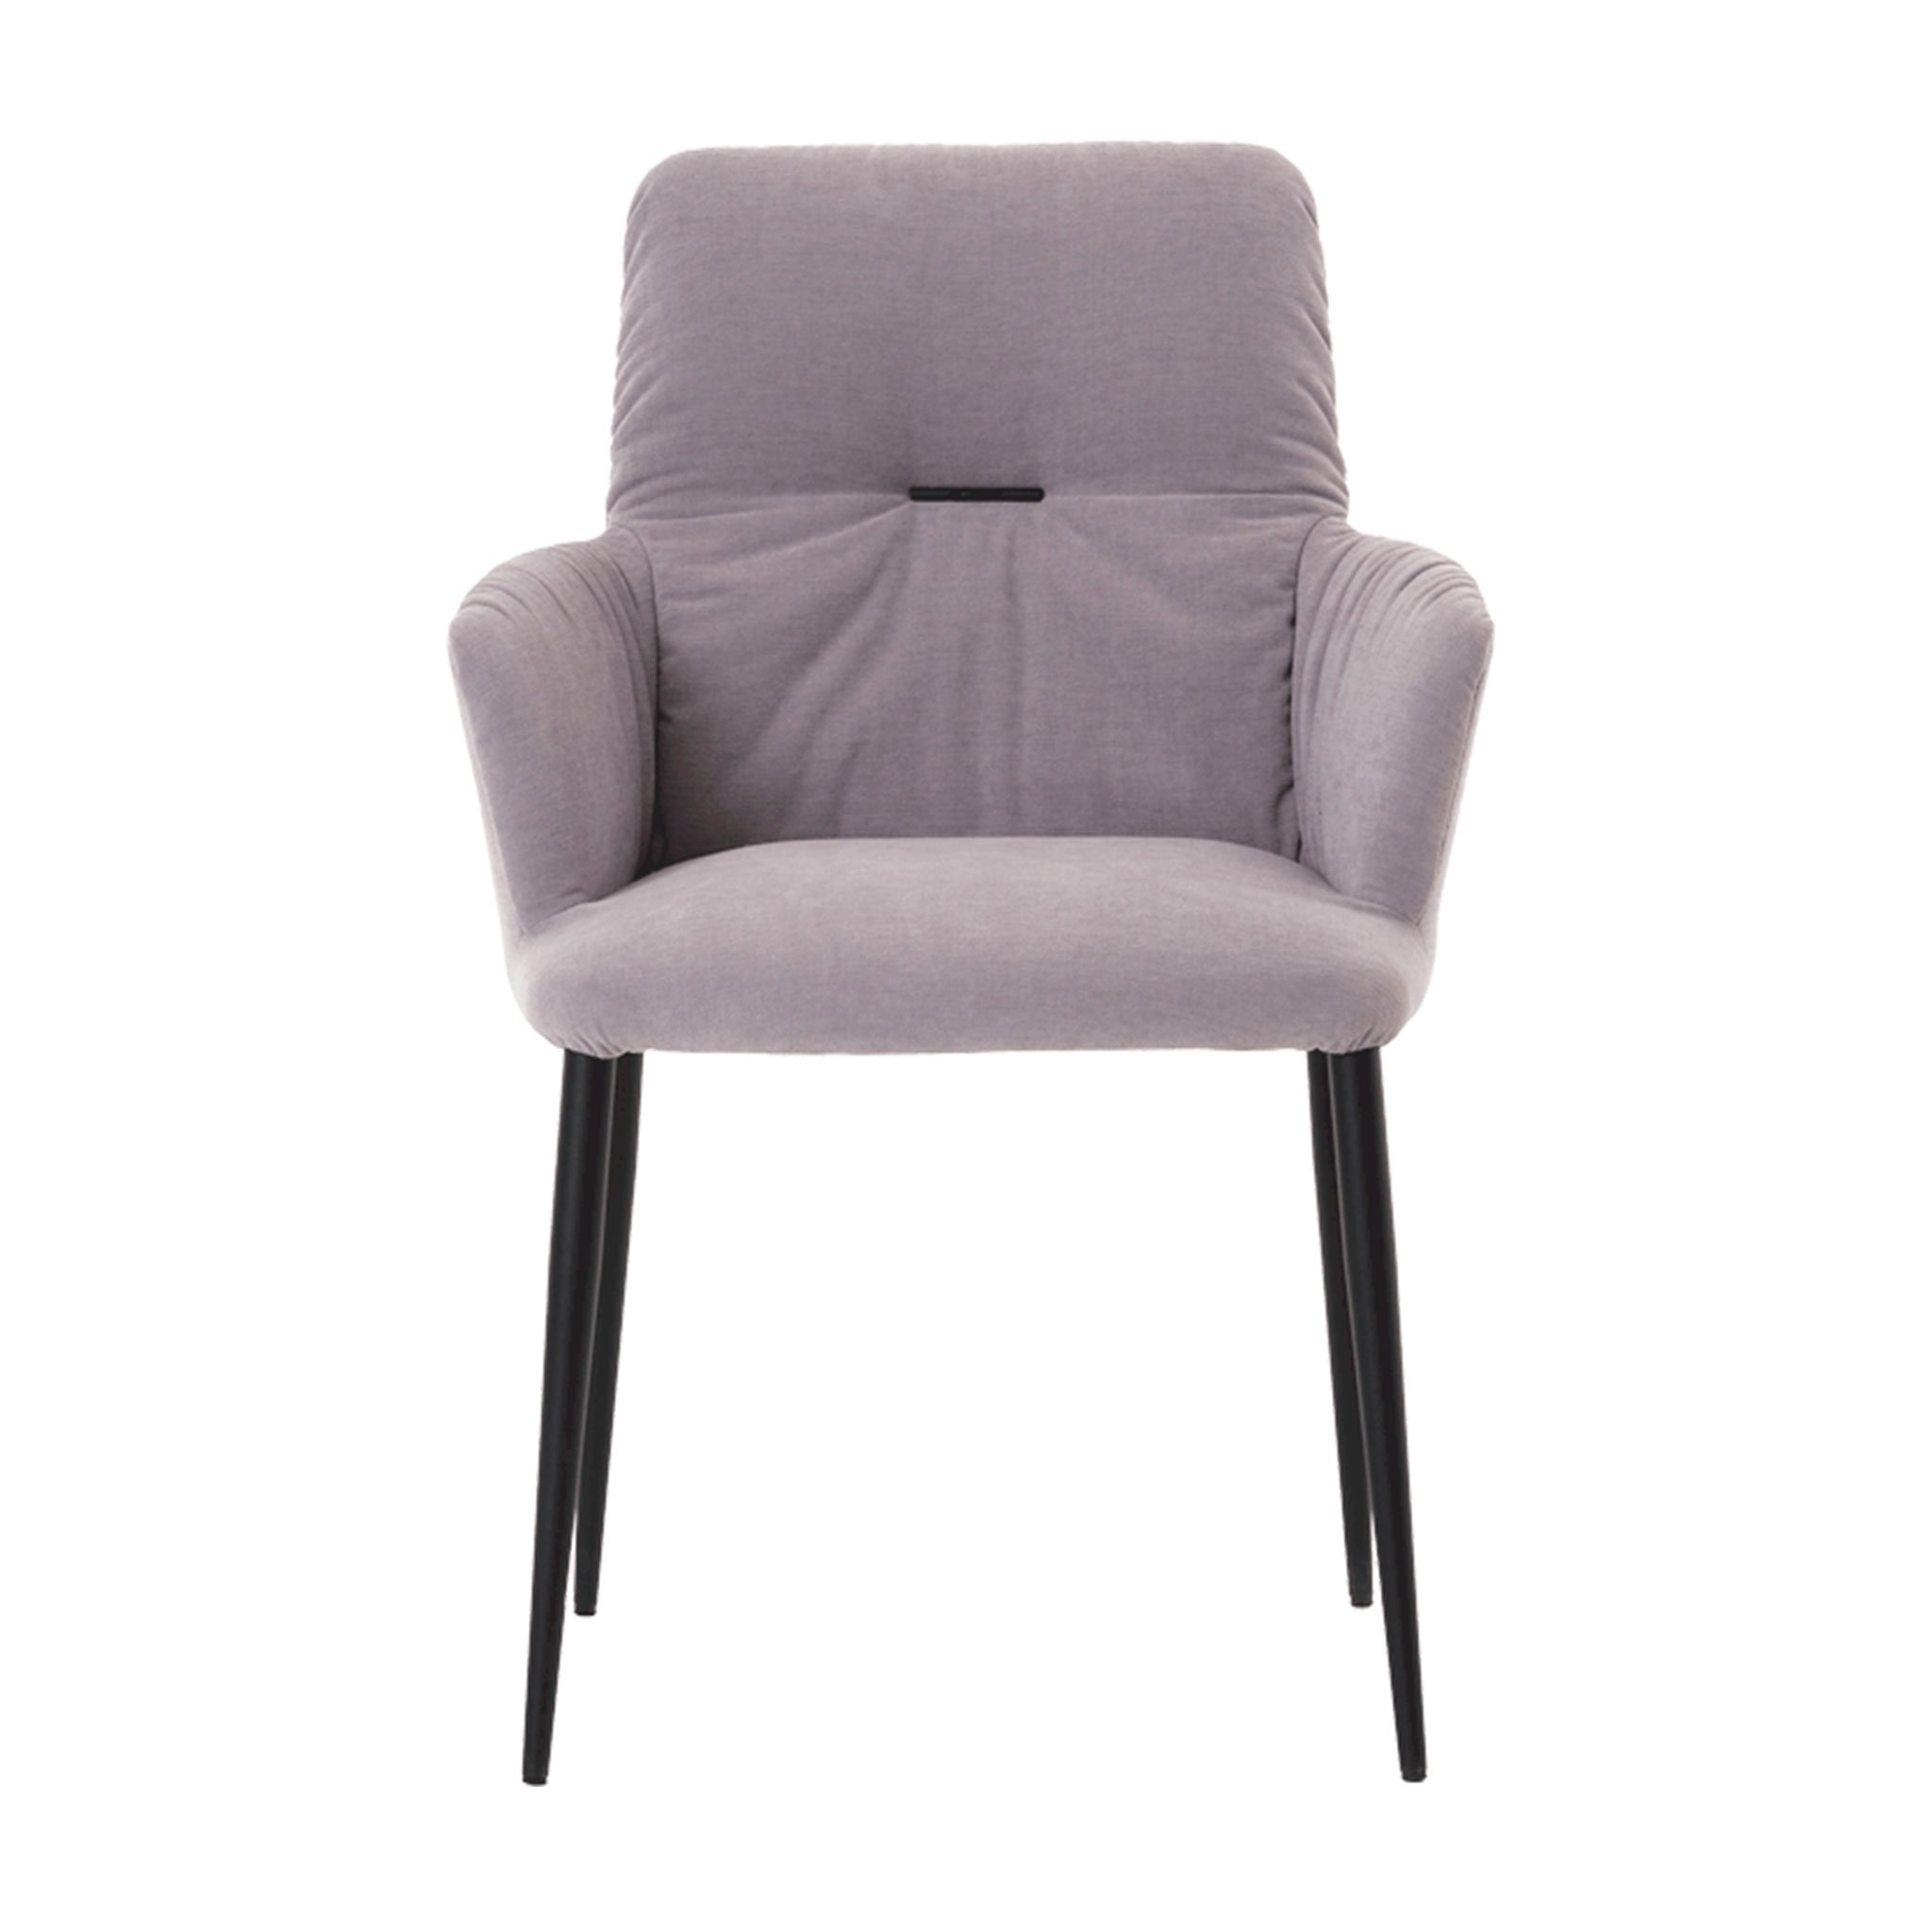 Ora chair with armrest - metal legs